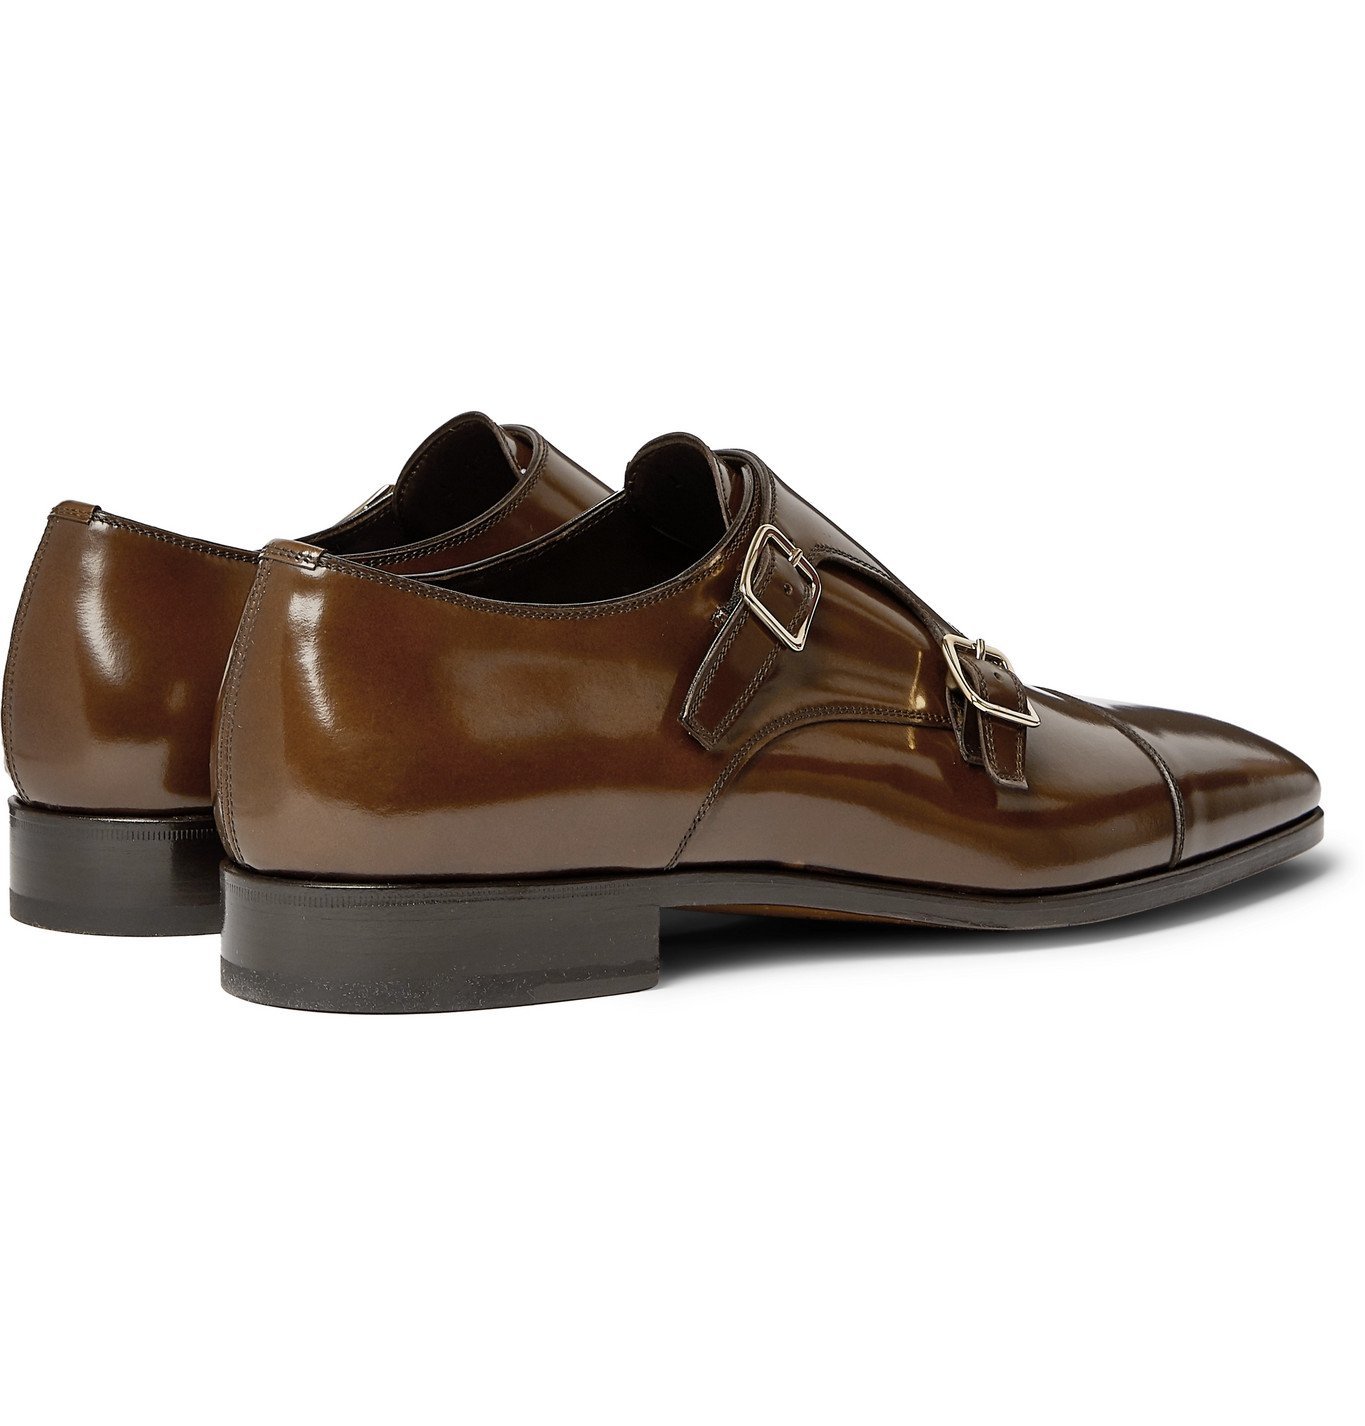 TOM FORD - Spazzolato Leather Monk-Strap Shoes - Brown TOM FORD